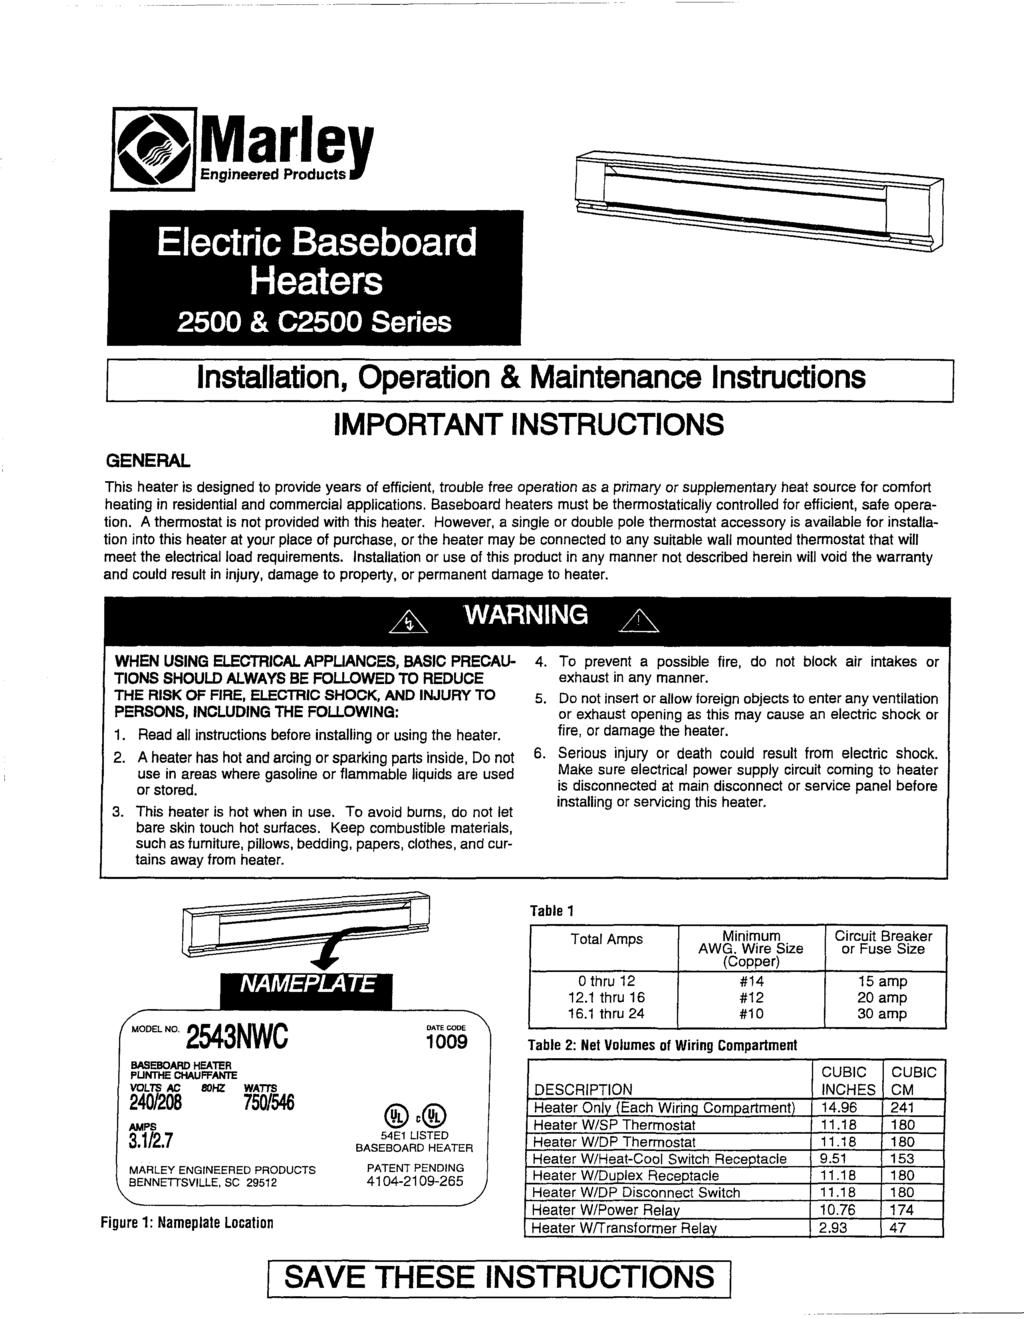 GENERAL Electric Baseboard Heaters 2500 & C2500 Series i-::lo.